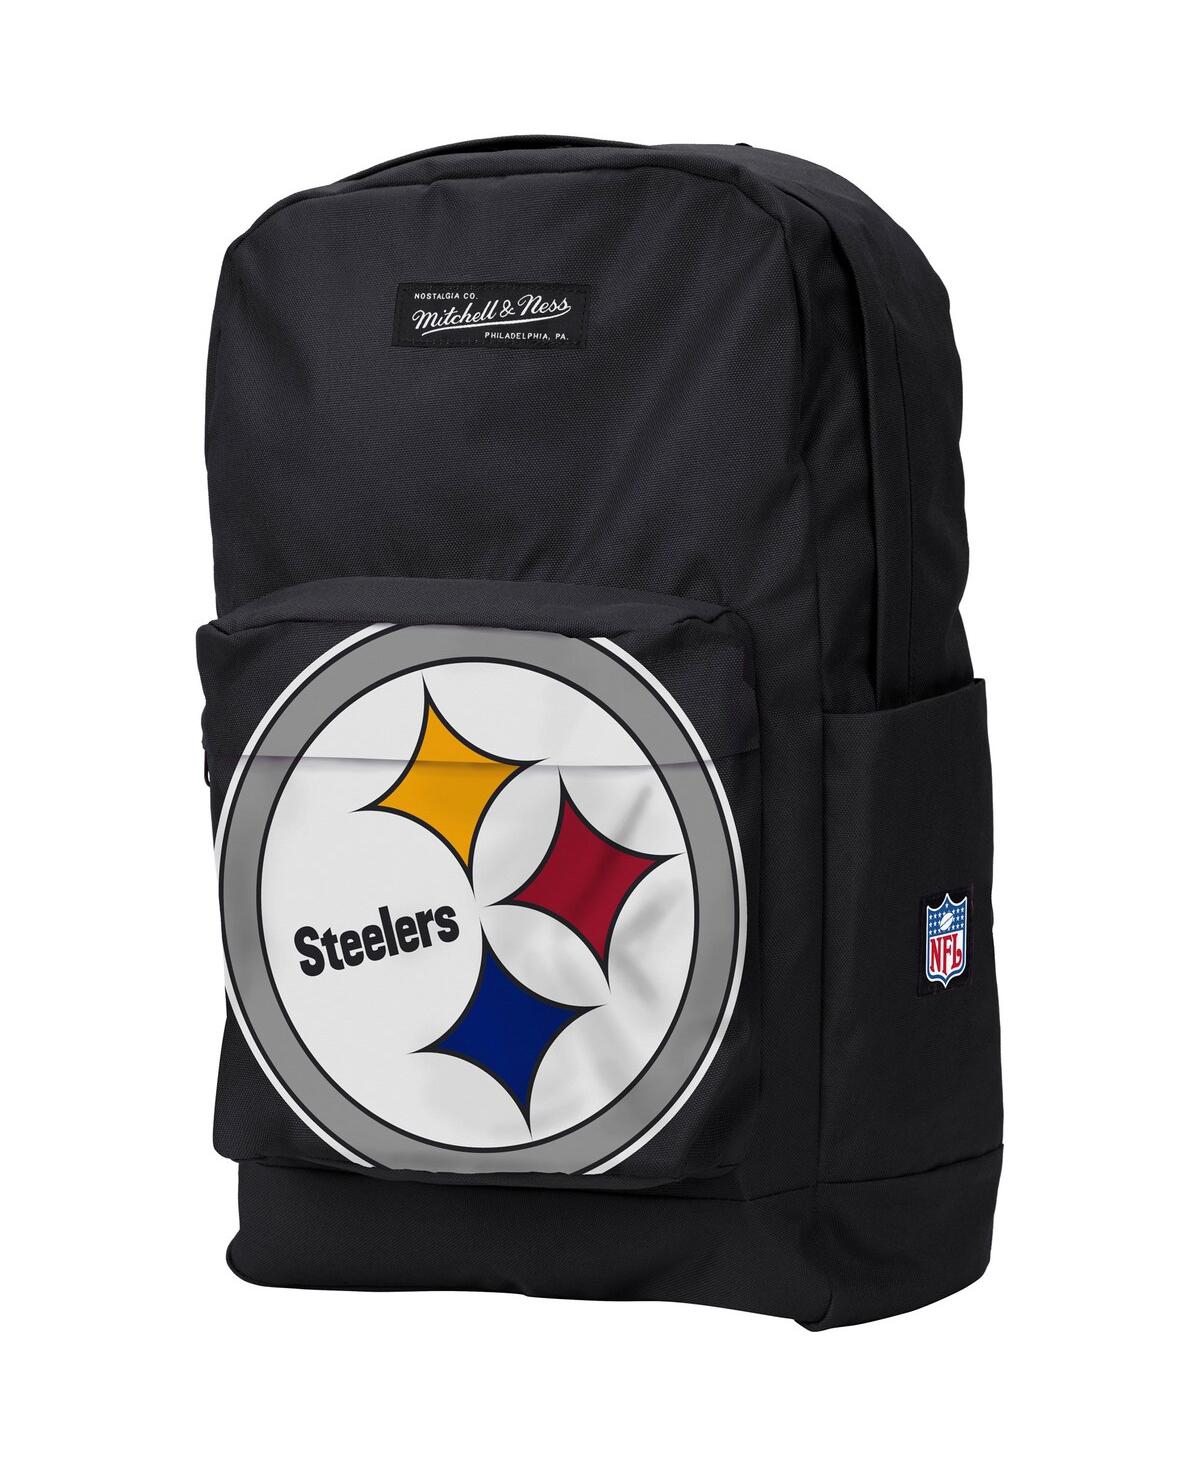 MITCHELL & NESS PITTSBURGH STEELERS BACKPACK